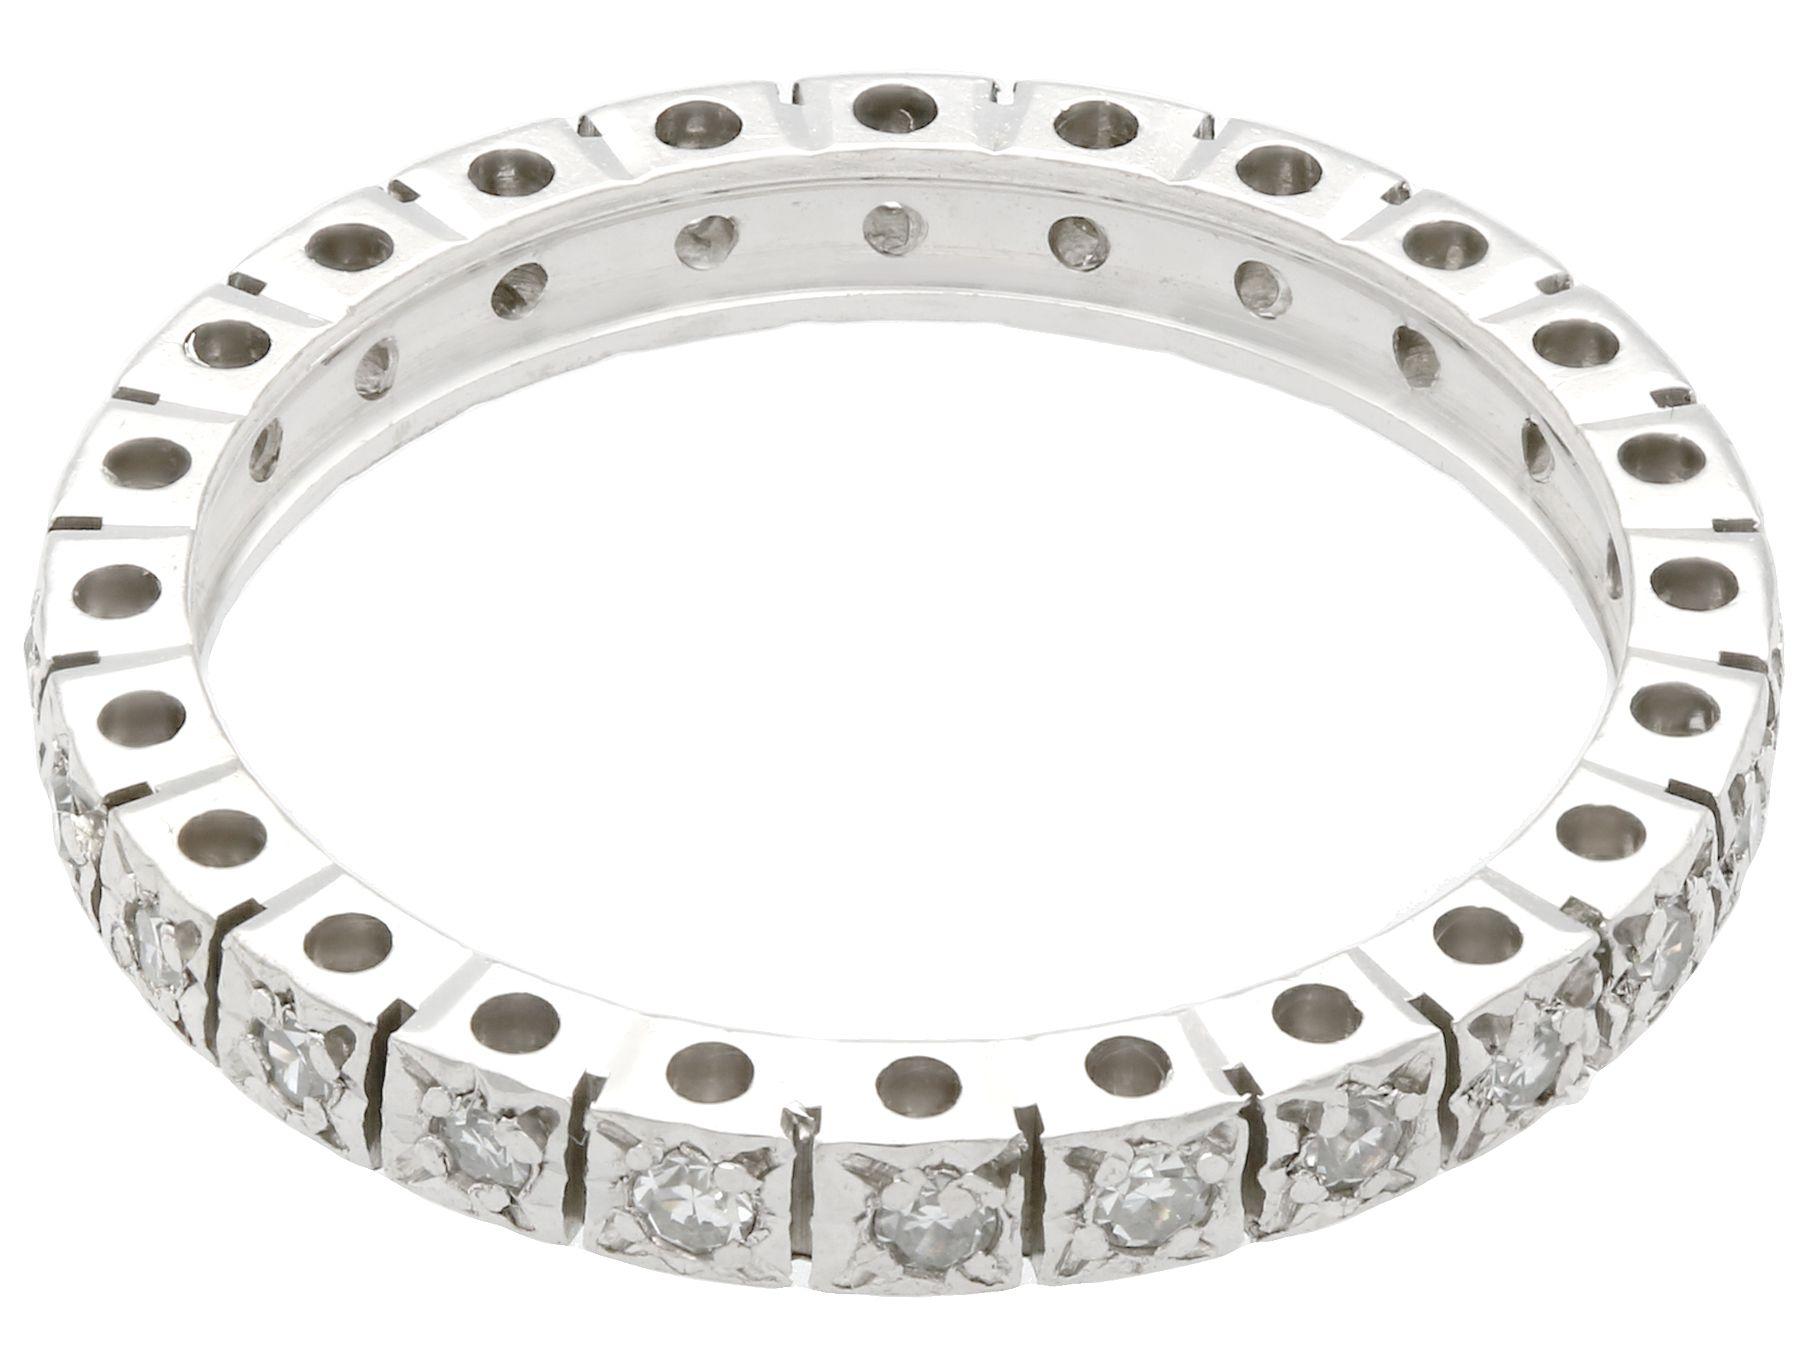 1970s Diamond and White Gold Full Eternity Ring In Excellent Condition For Sale In Jesmond, Newcastle Upon Tyne